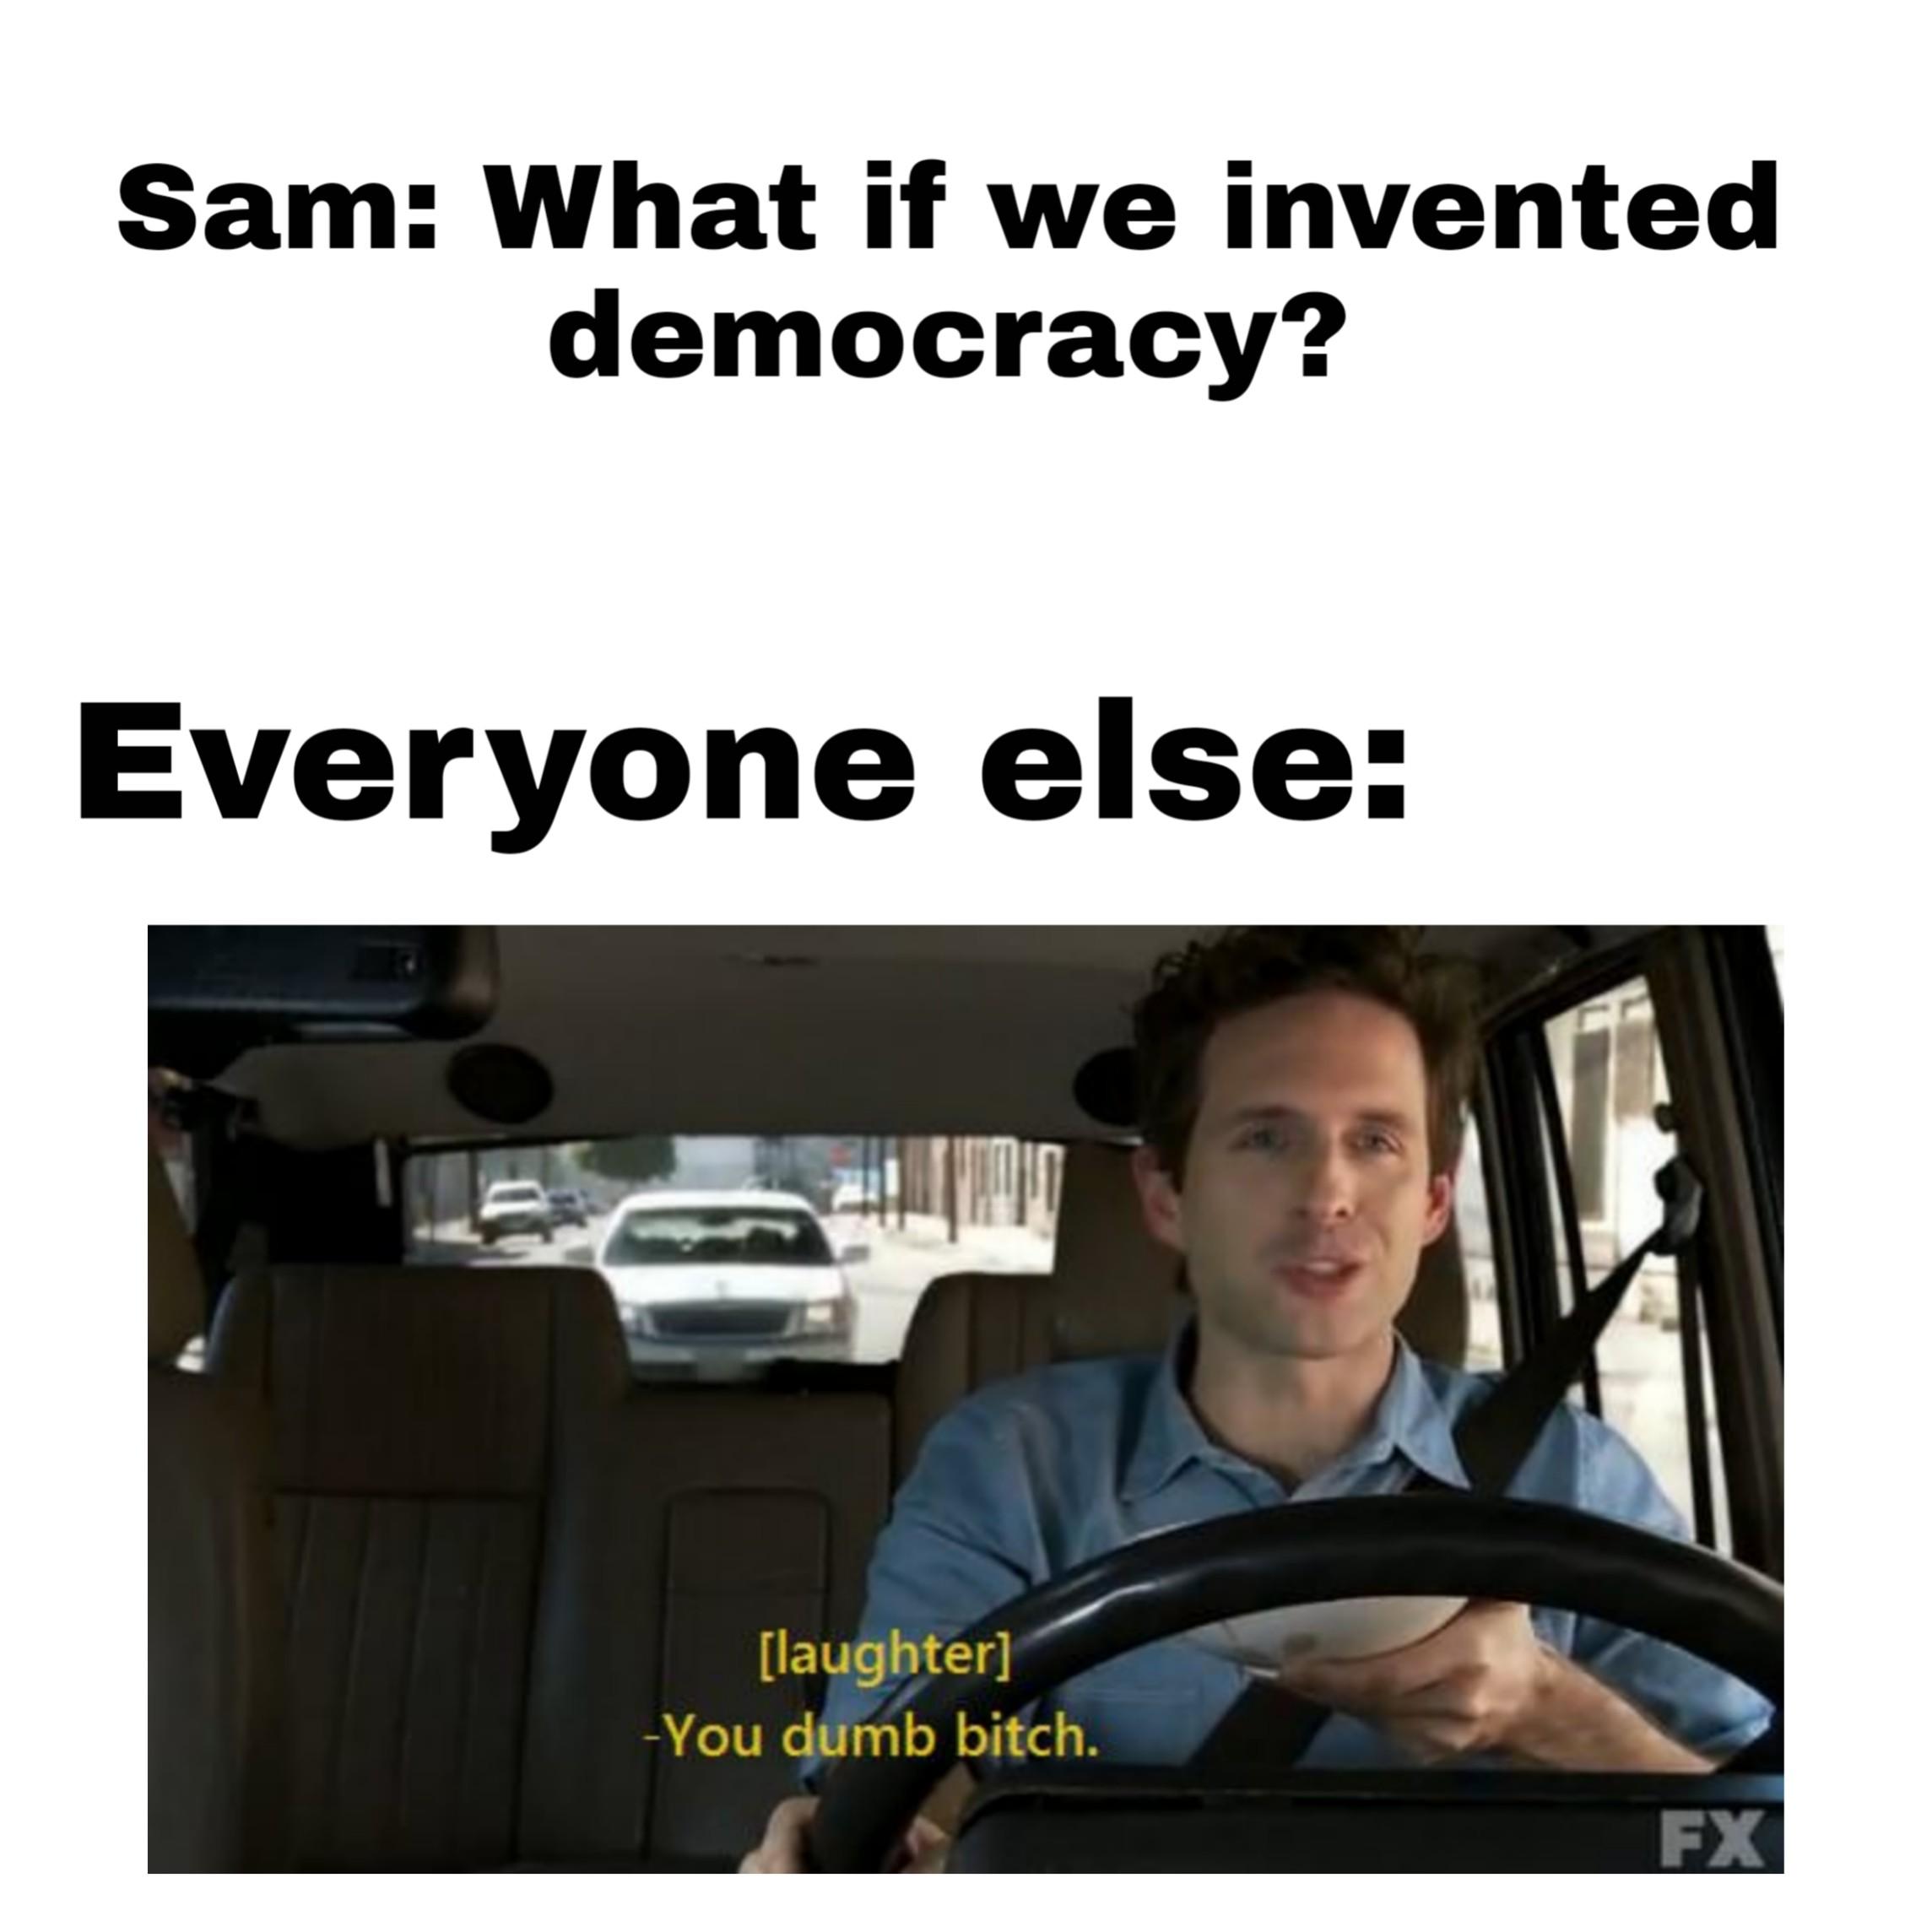 tyrell game-of-thrones-memes tyrell text: Sam: What if we invented democracy? Everyone else: [laughter] -You dumb bitch. 